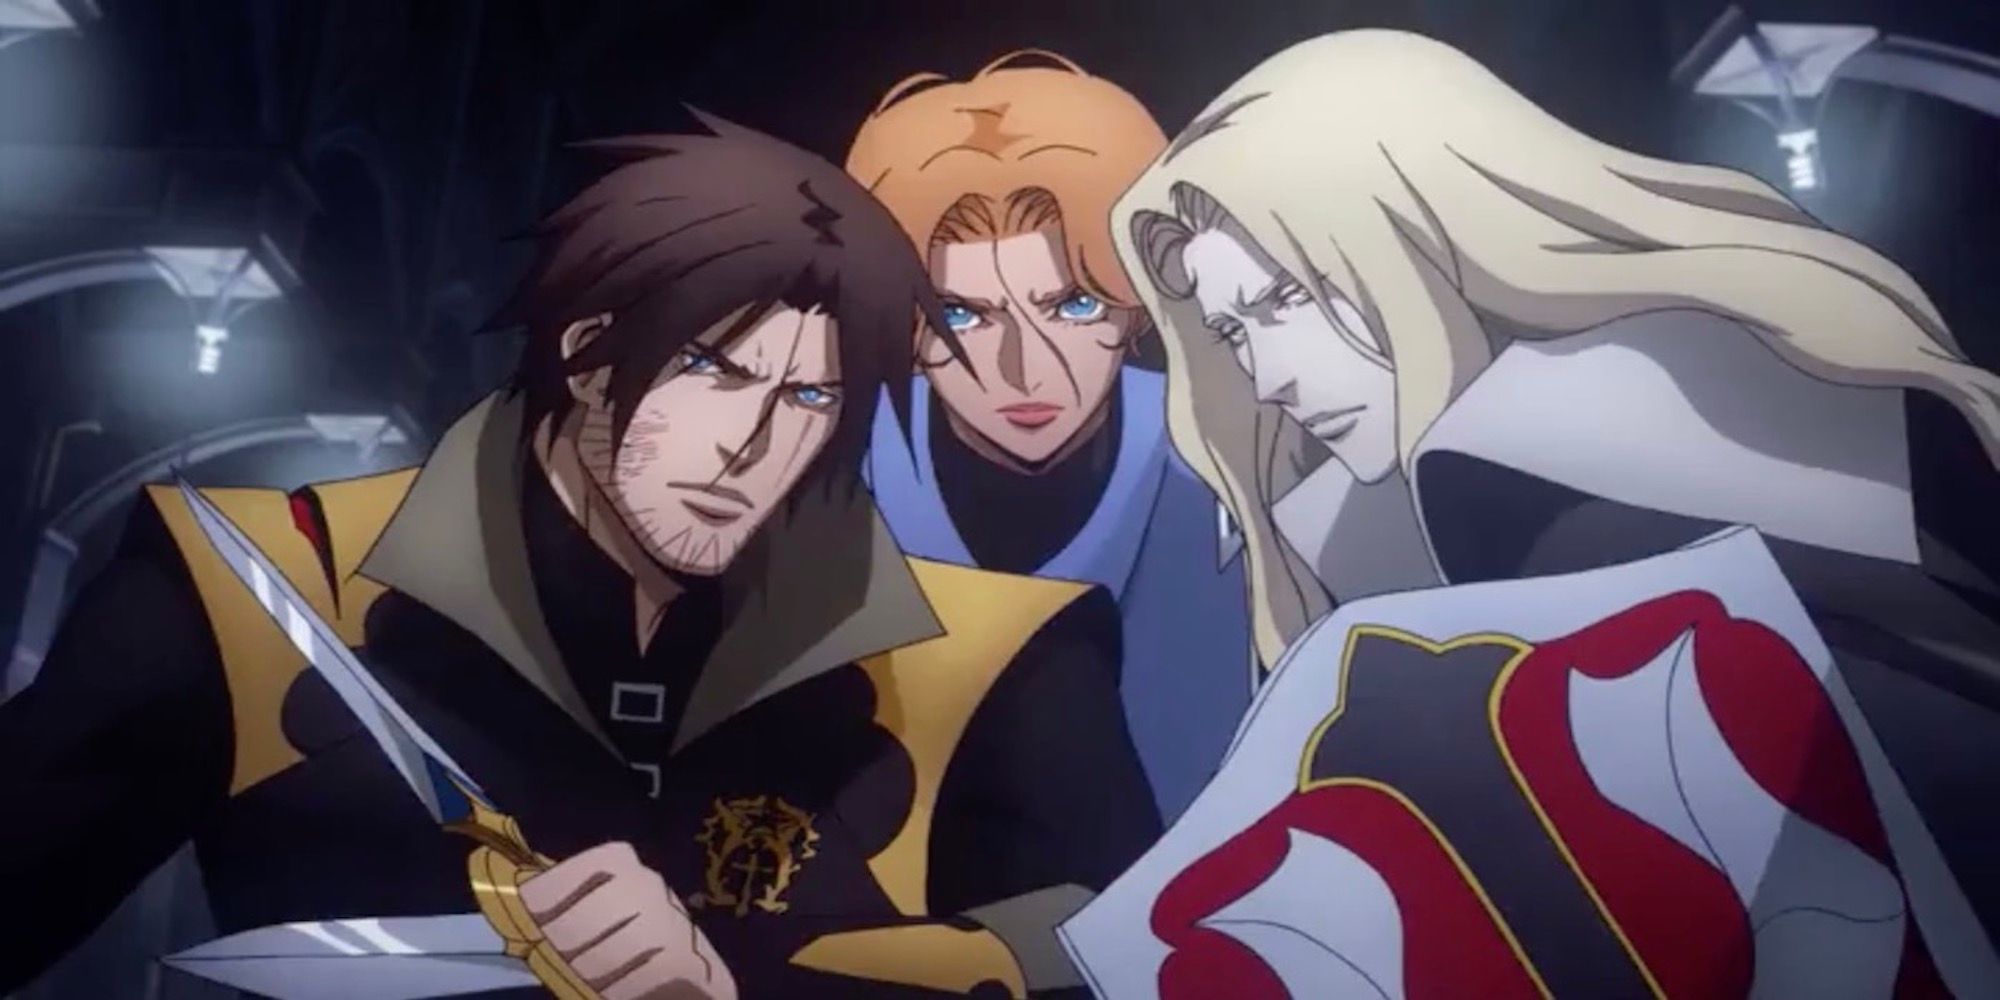 A scene with characters from Castlevania